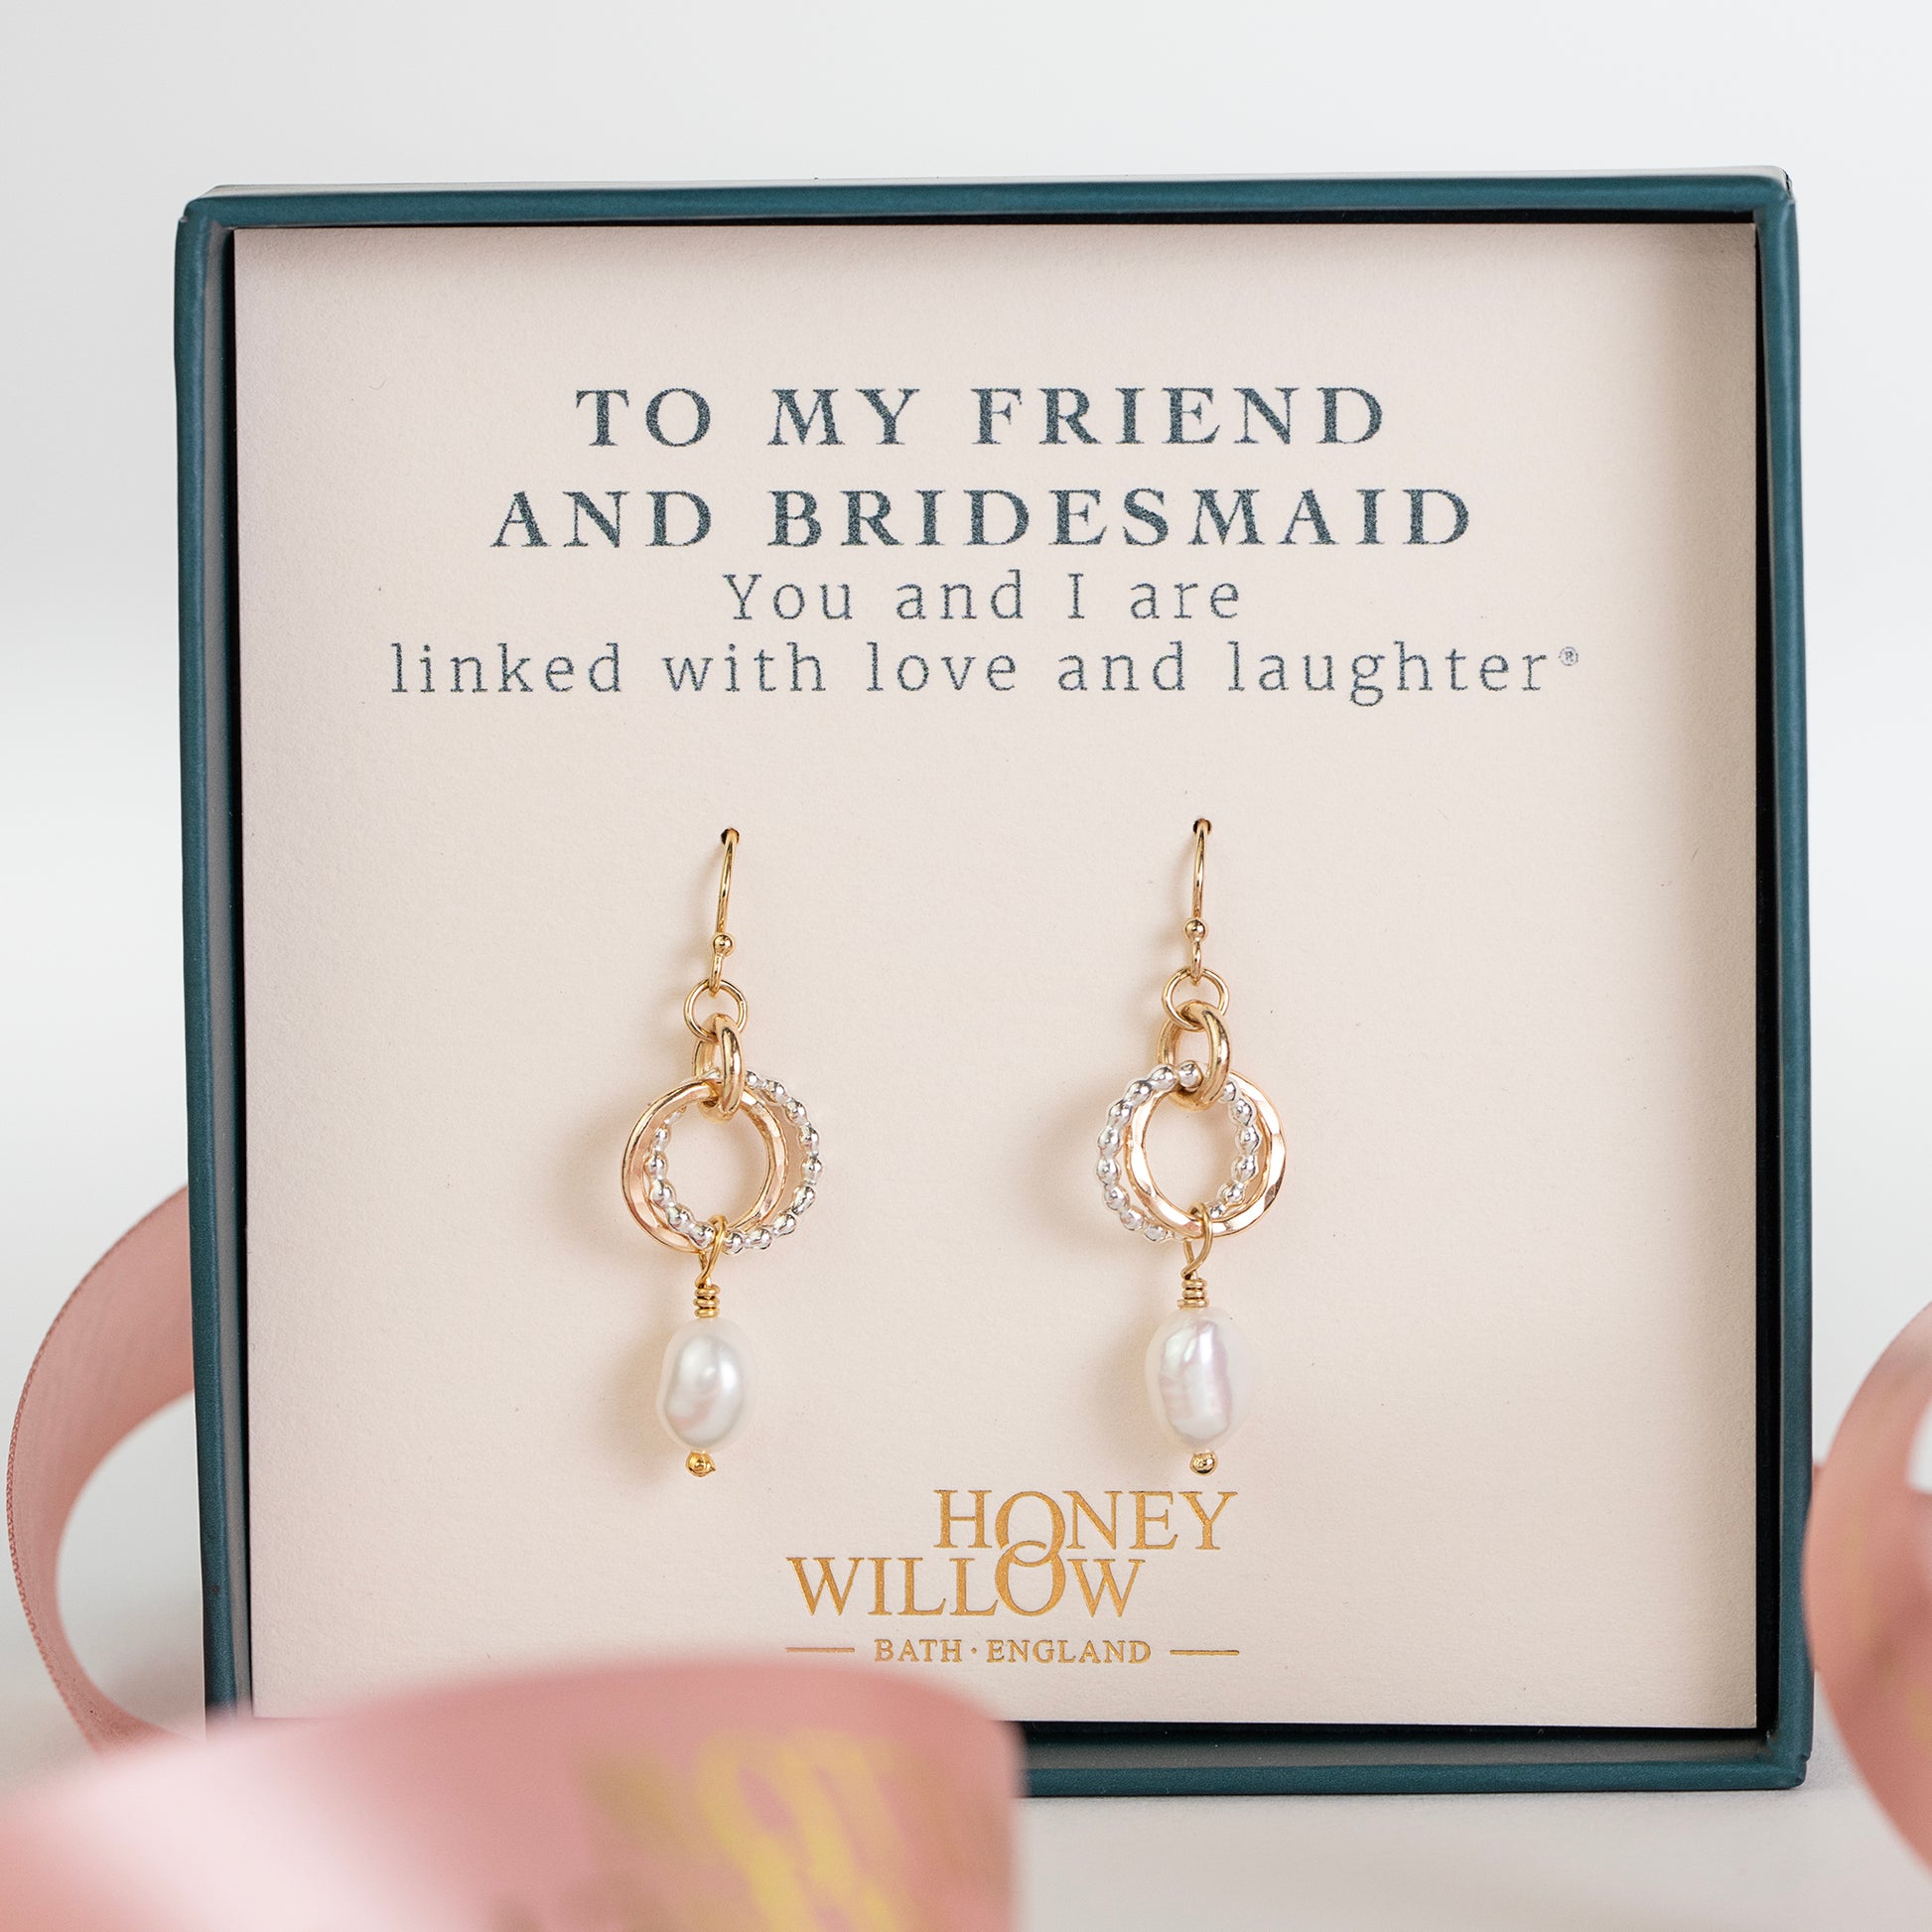  Friend & Bridesmaid Gift - Love Knot Pearl Earrings - Silver & Gold